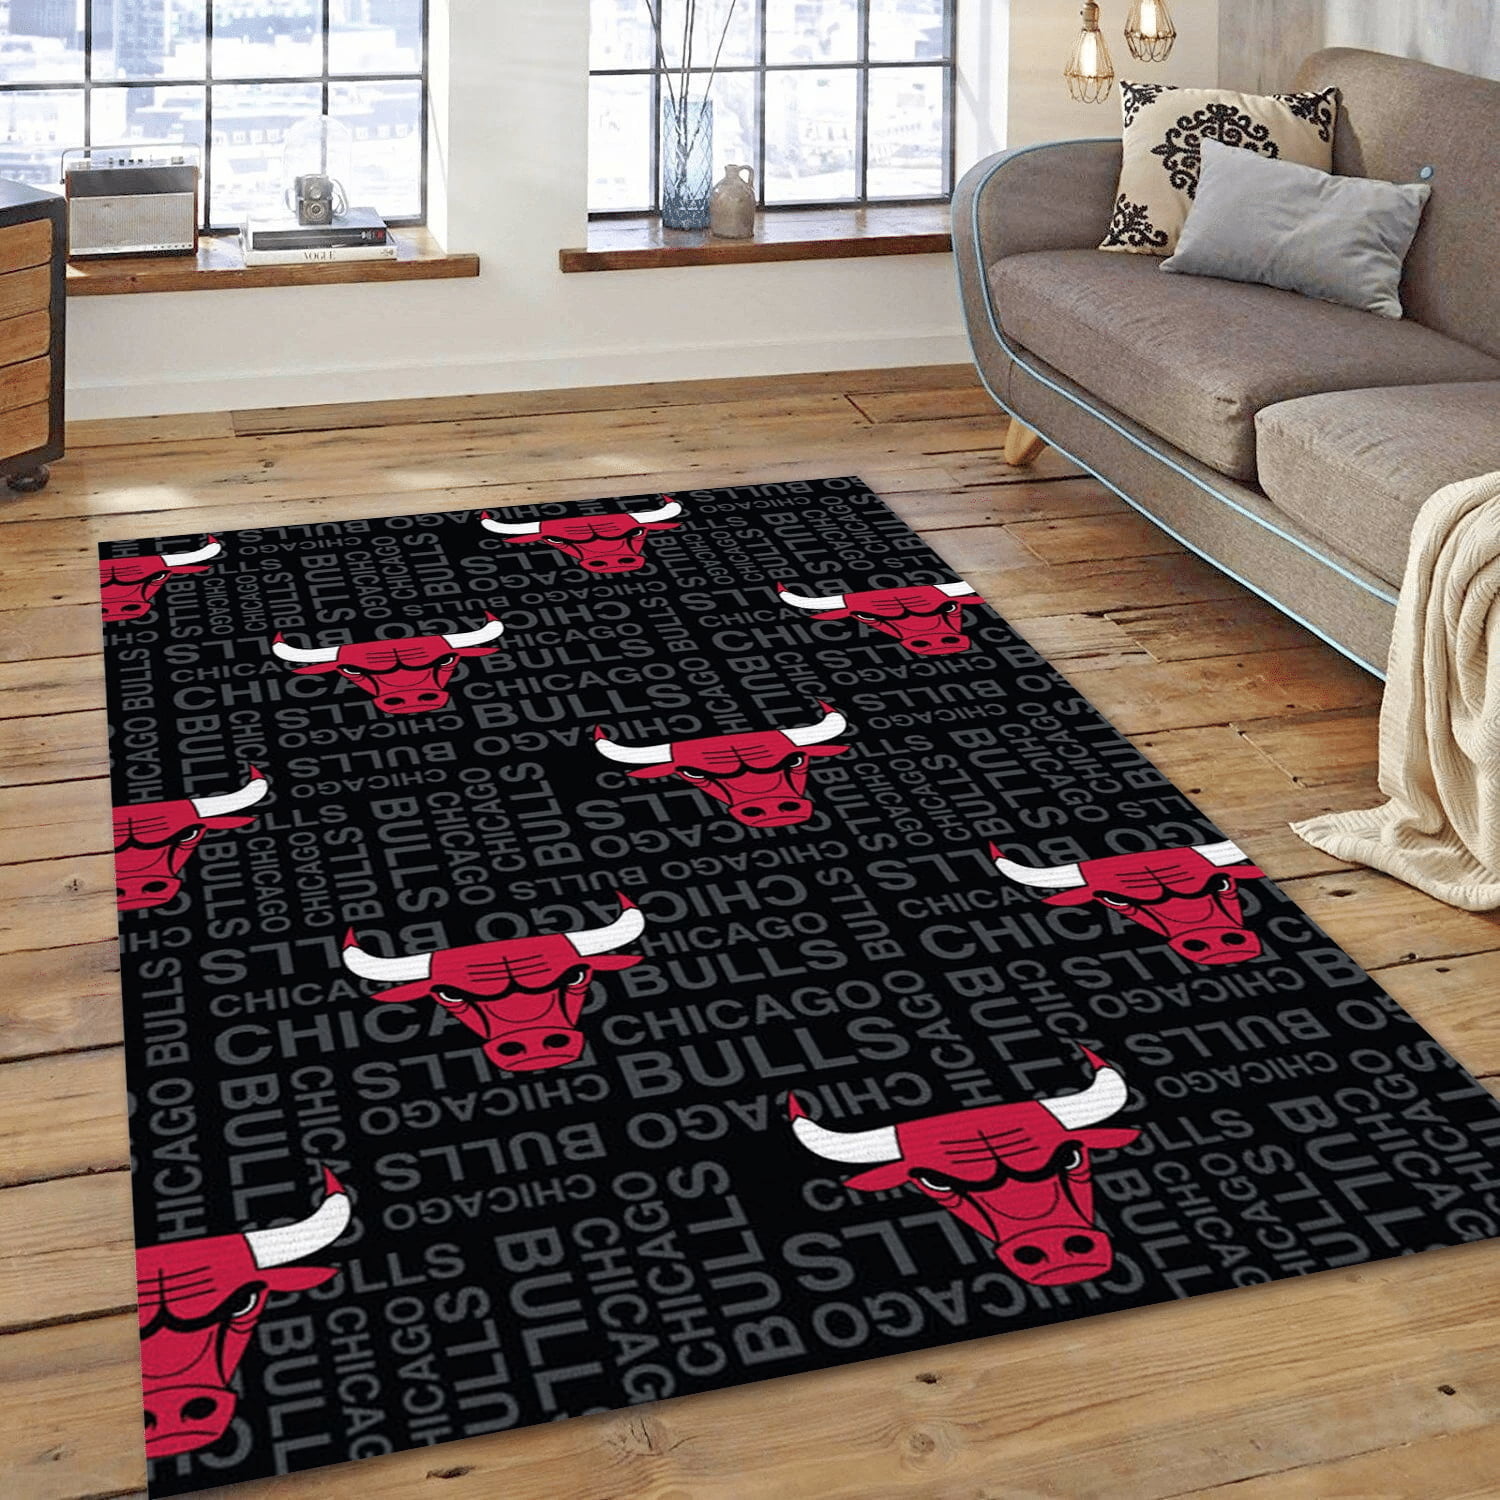 Chicago Bulls Patterns 1 Area Rug Carpet, Living Room Rug - Home US Decor - Indoor Outdoor Rugs